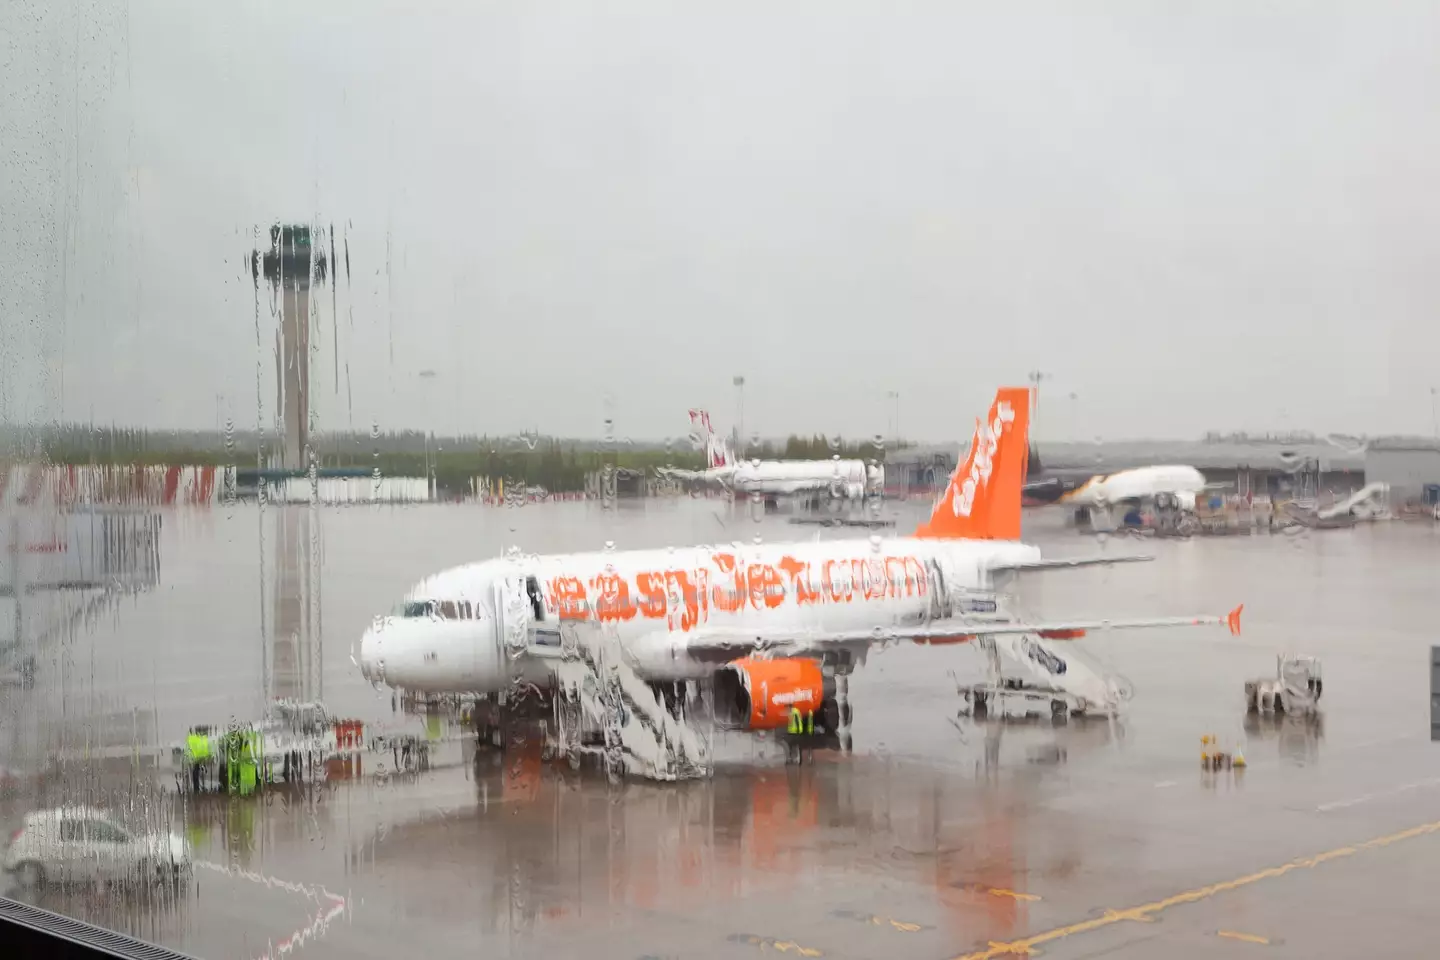 A member of easyJet's cabin crew tried to assist the passenger after their fall.